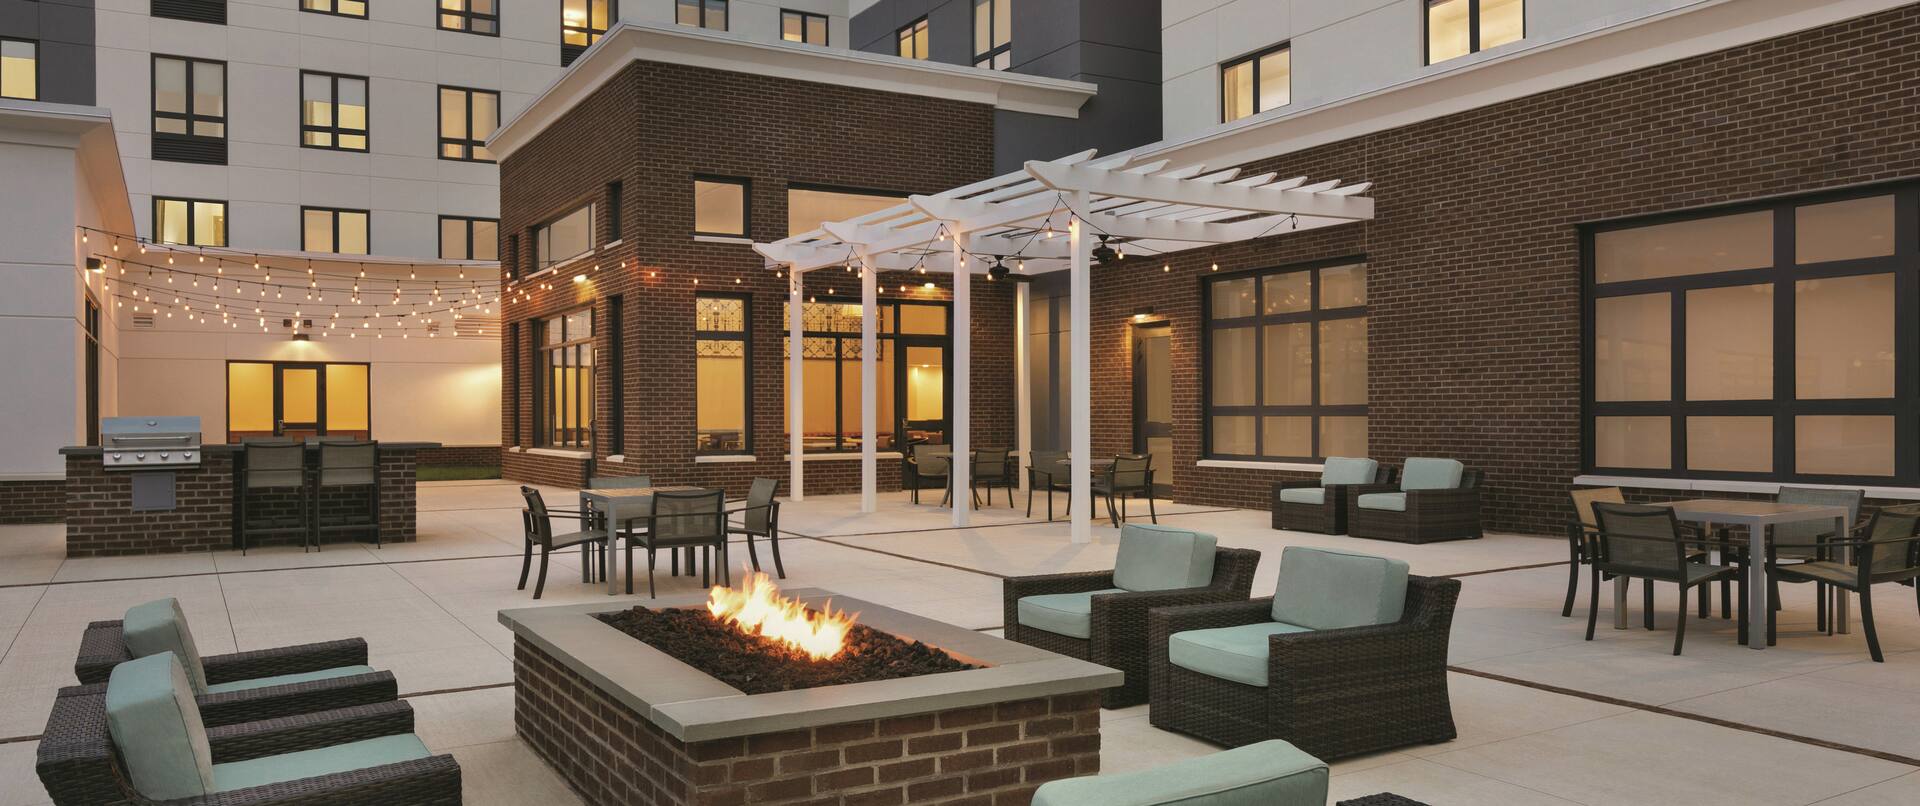 Outdoor Seating with Fire pit